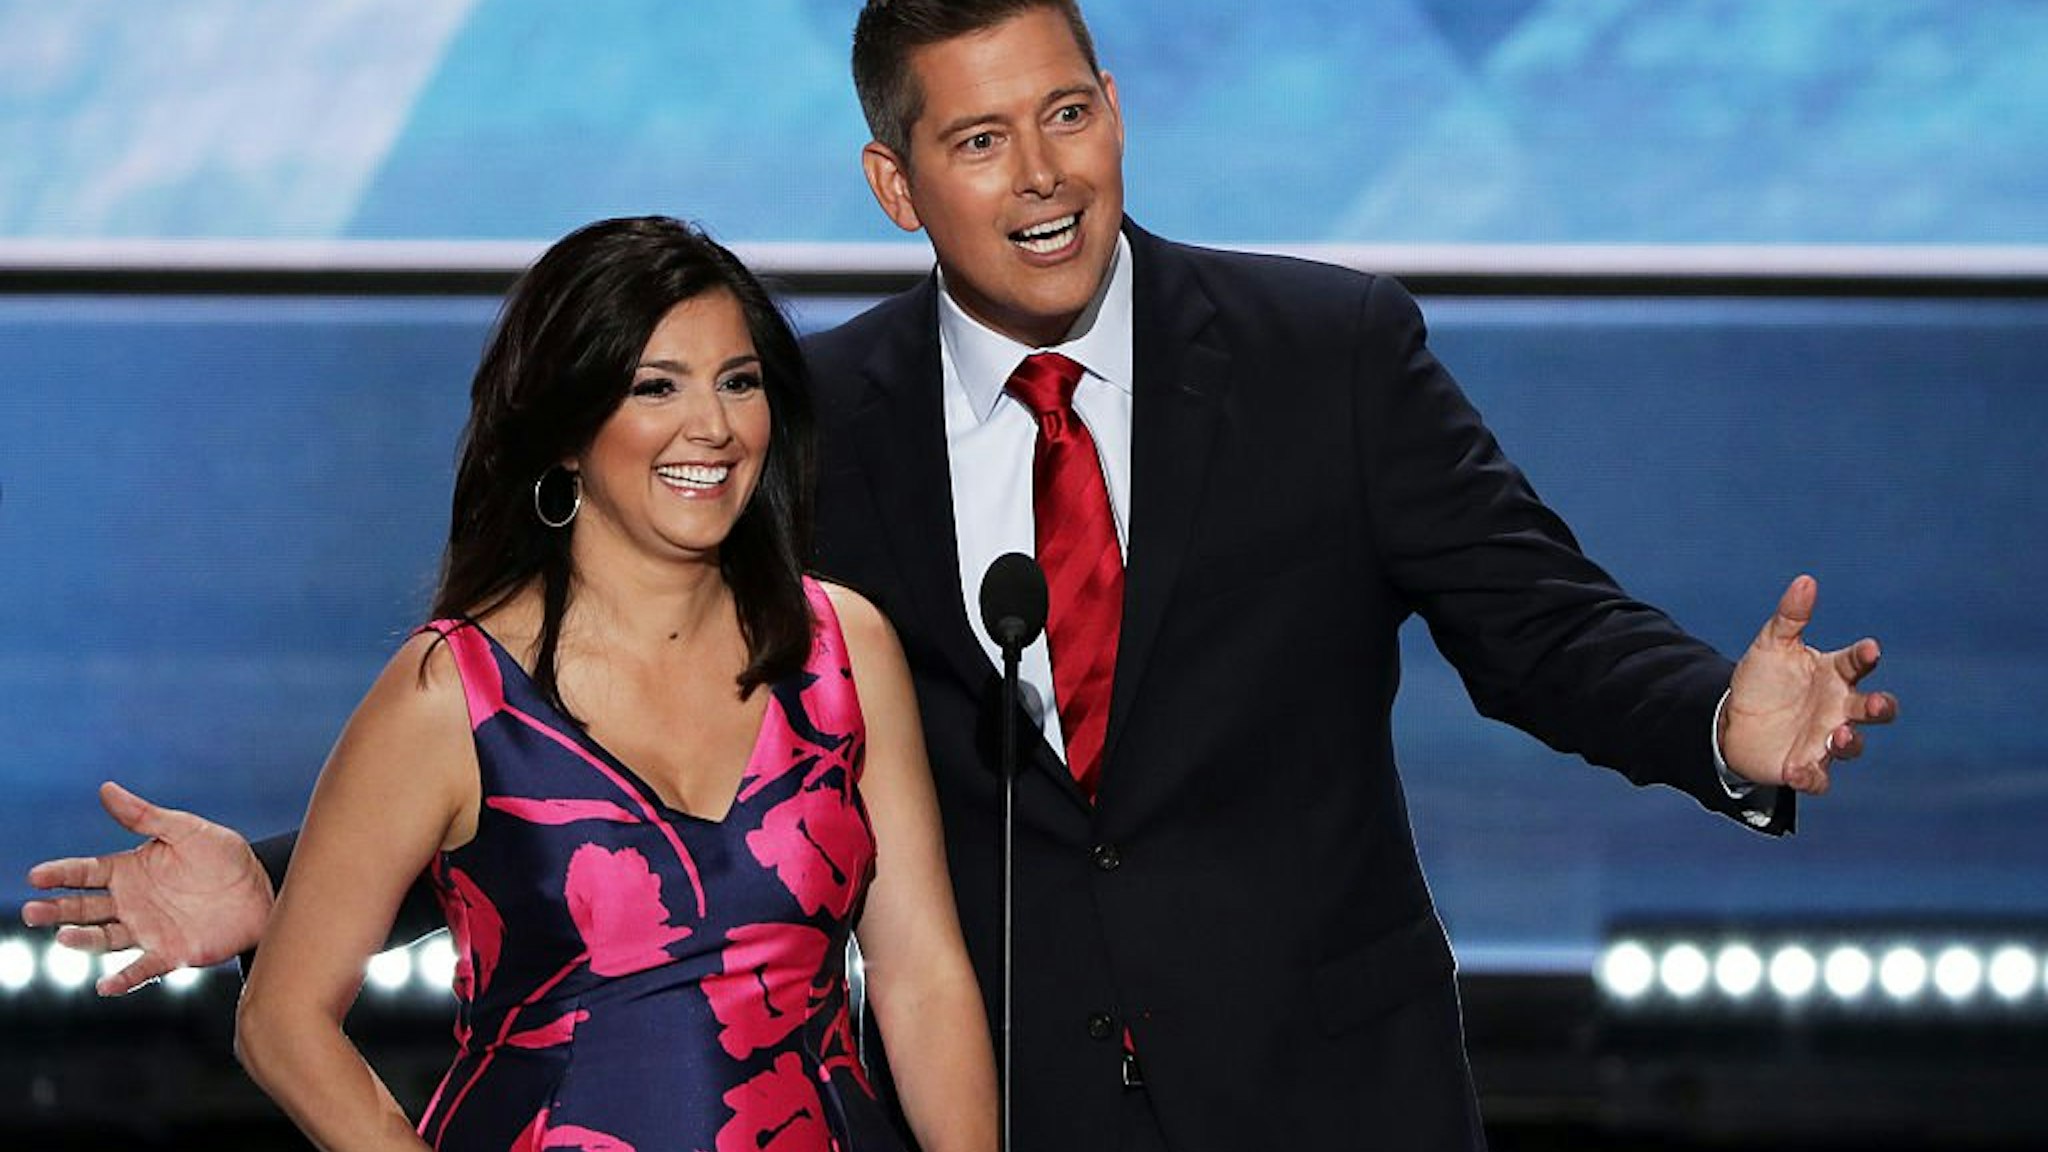 Sean Duffy along with his wife Rachel Campos-Duffy deliver a speech on the first day of the Republican National Convention